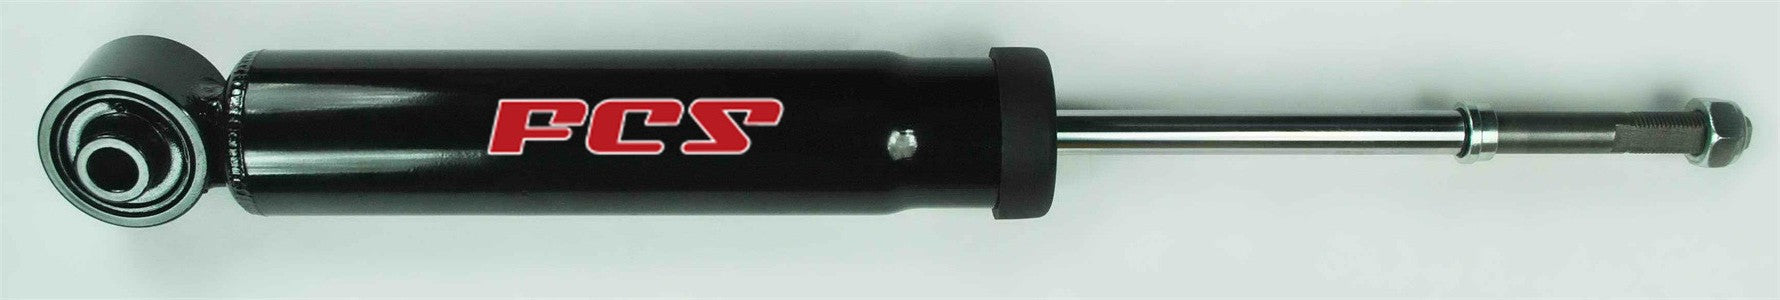 Rear Shock Absorber for Nissan Quest 2009 2008 2007 2006 2005 2004 - FCS 341560